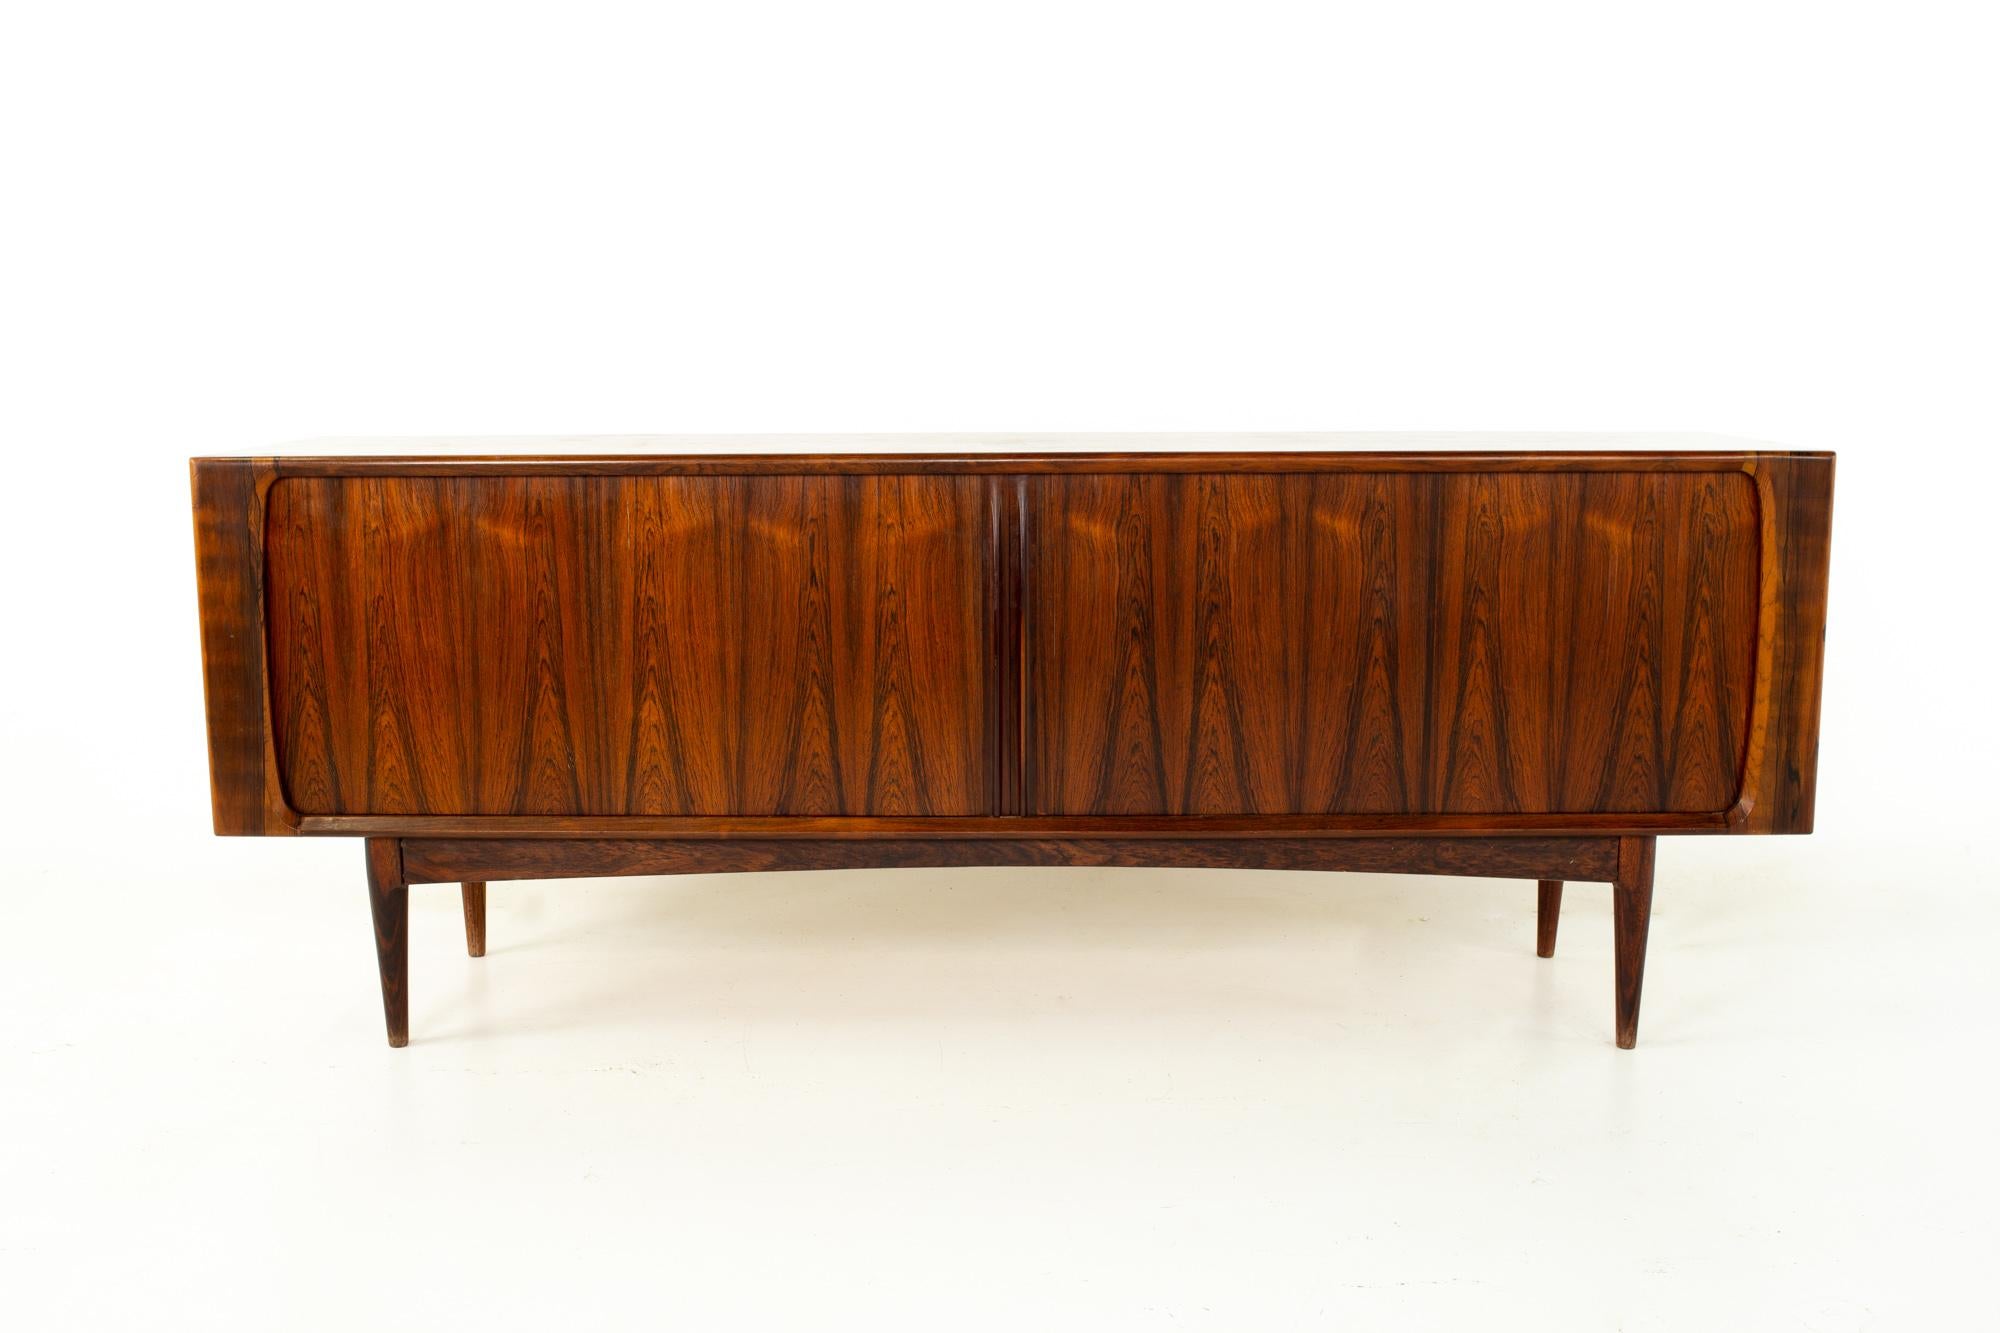 Bernhard Pedersen mid century rosewood tambour door credenza

Credenza measures: 82.75 wide x 19.5 deep x 31.75 inches high

All pieces of furniture can be had in what we call restored vintage condition. That means the piece is restored upon